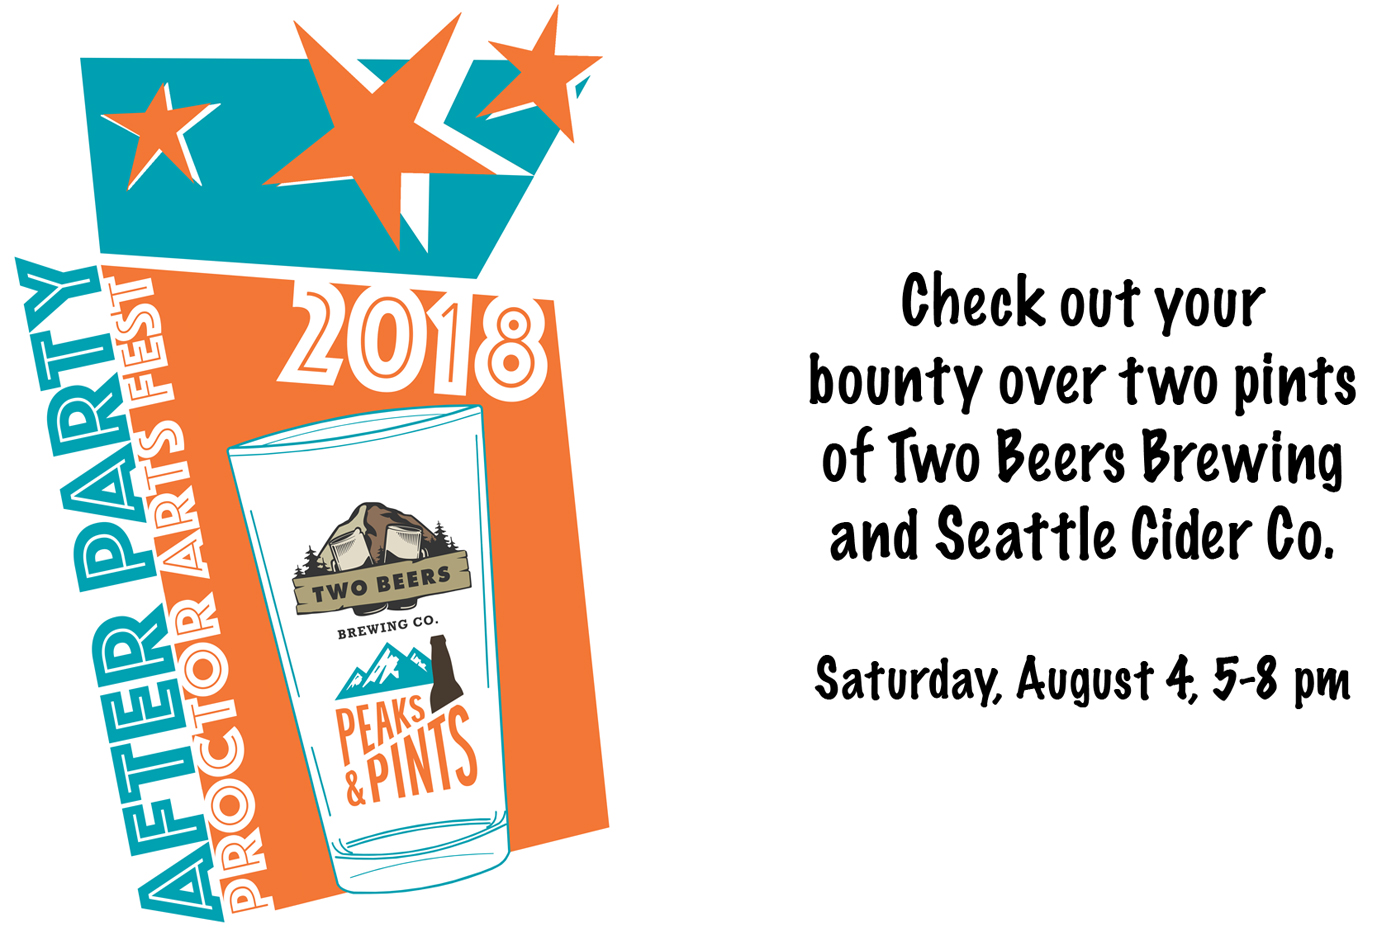 Peaks-and-Pints-Proctor-Arts-Fest-After-Party-calendar